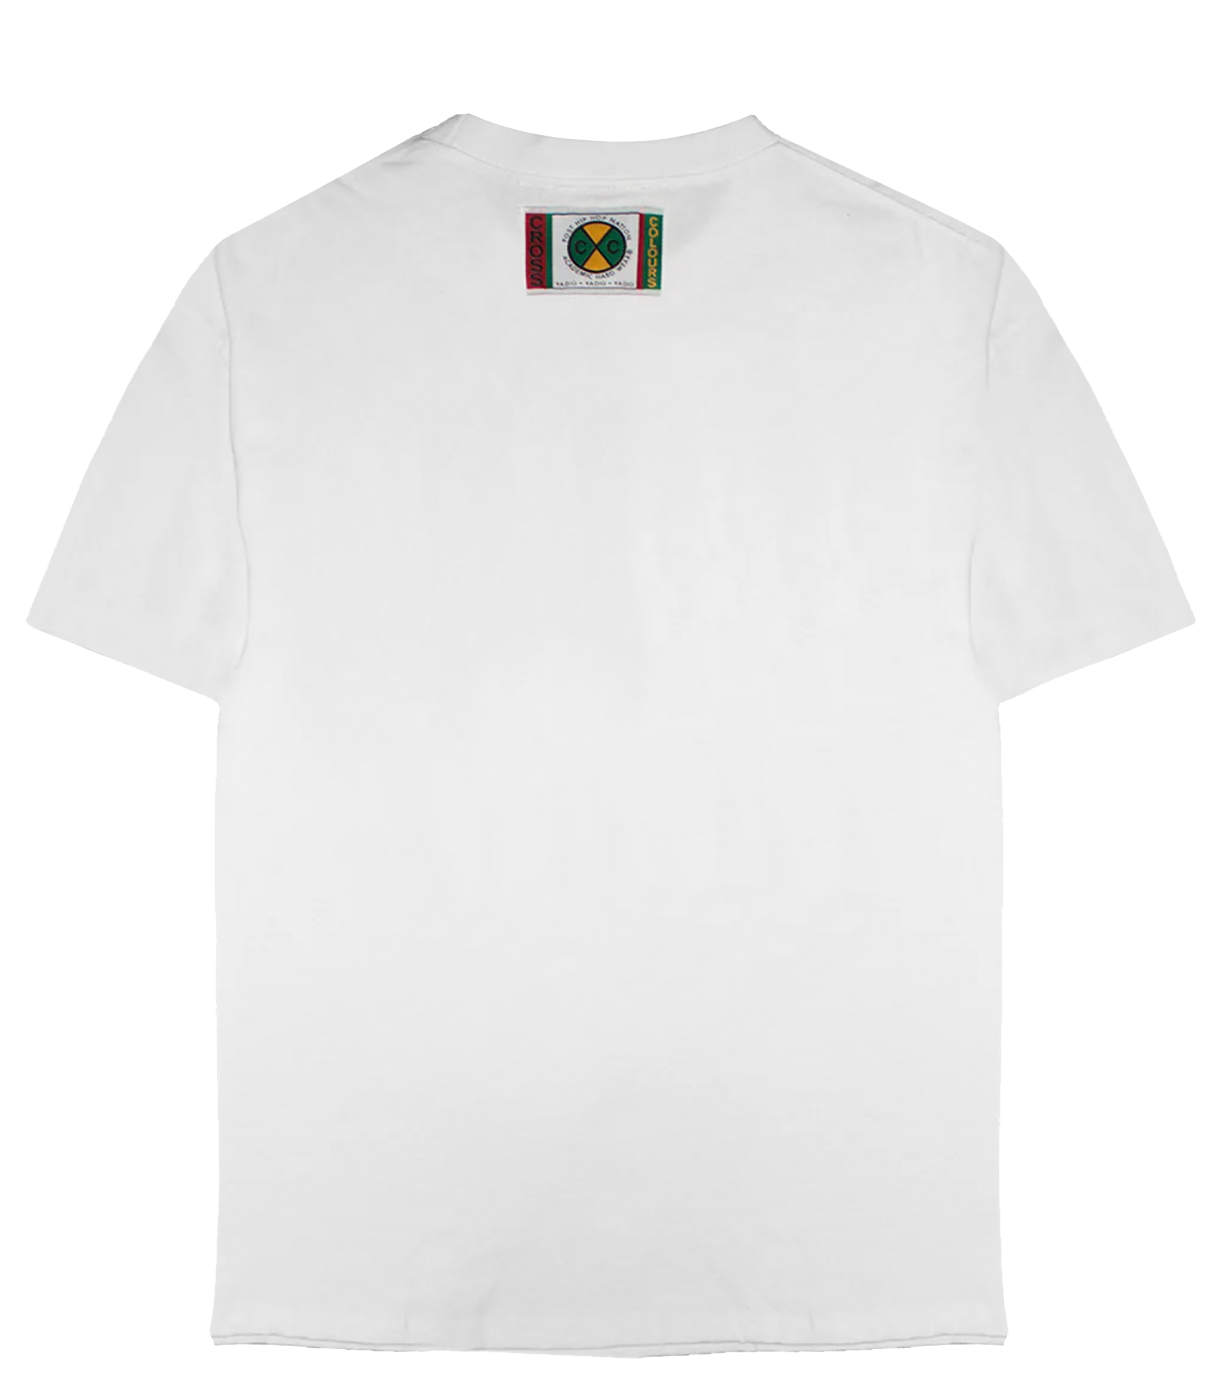 Cross Colours Studded Rock of Ages T-shirt  - White